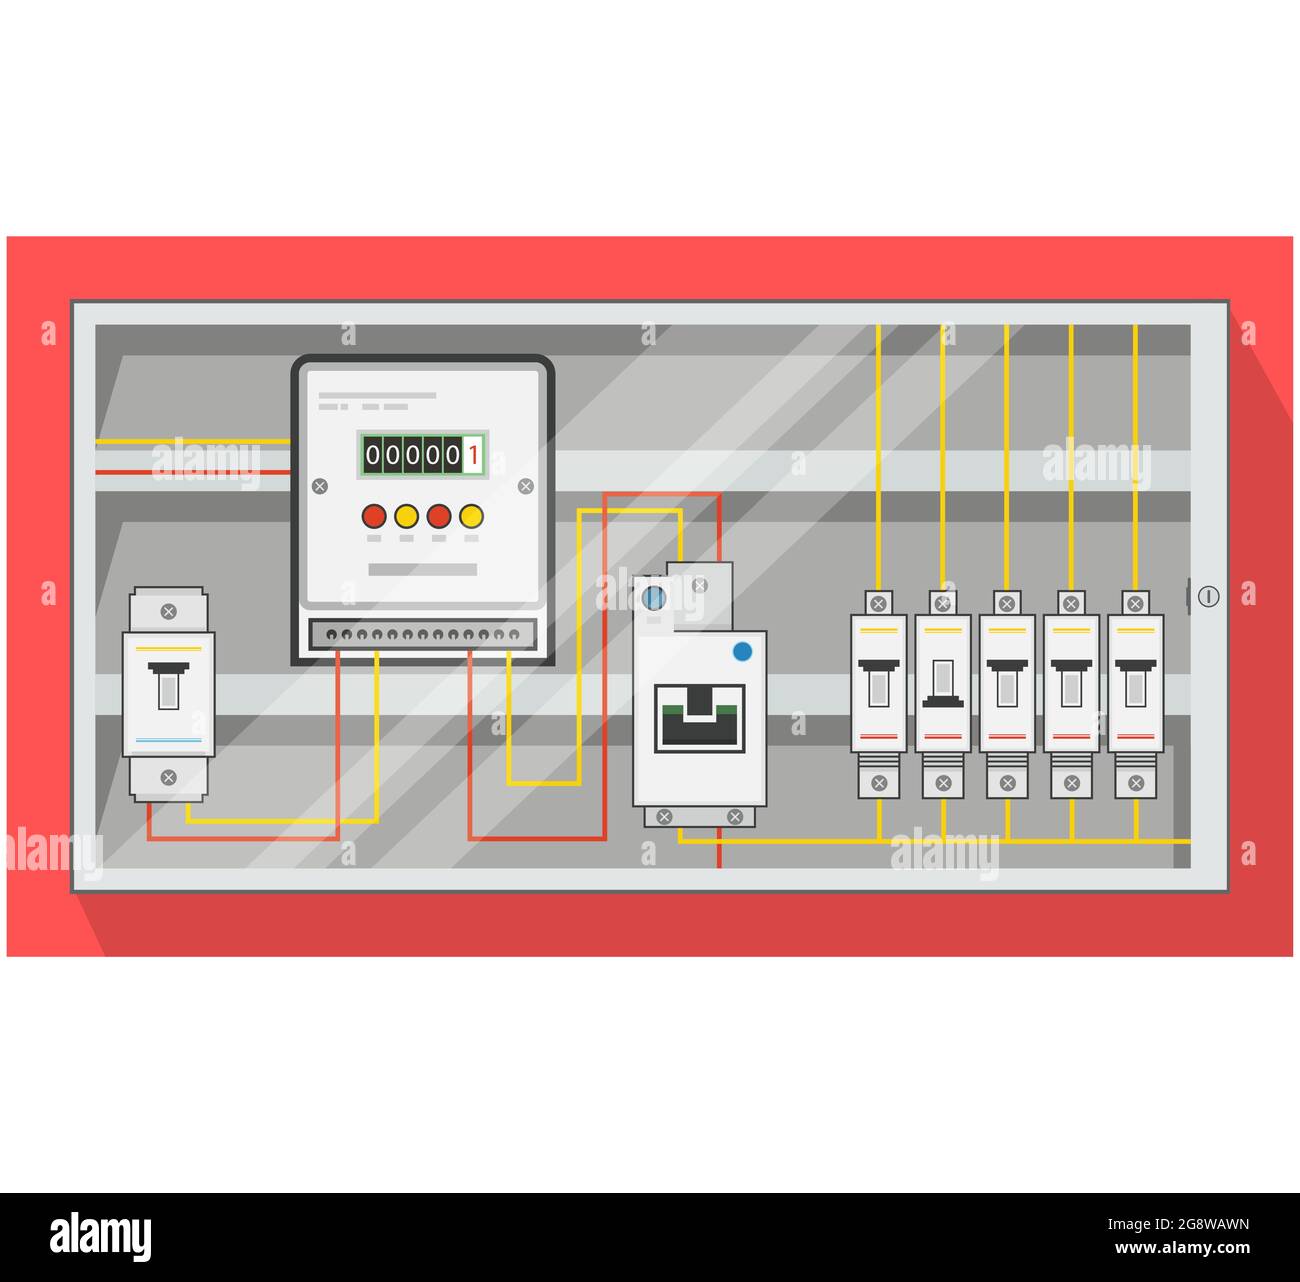 Electrical Distribution - Power Switch Panel - Stock Illustration as EPS 10 File Stock Vector